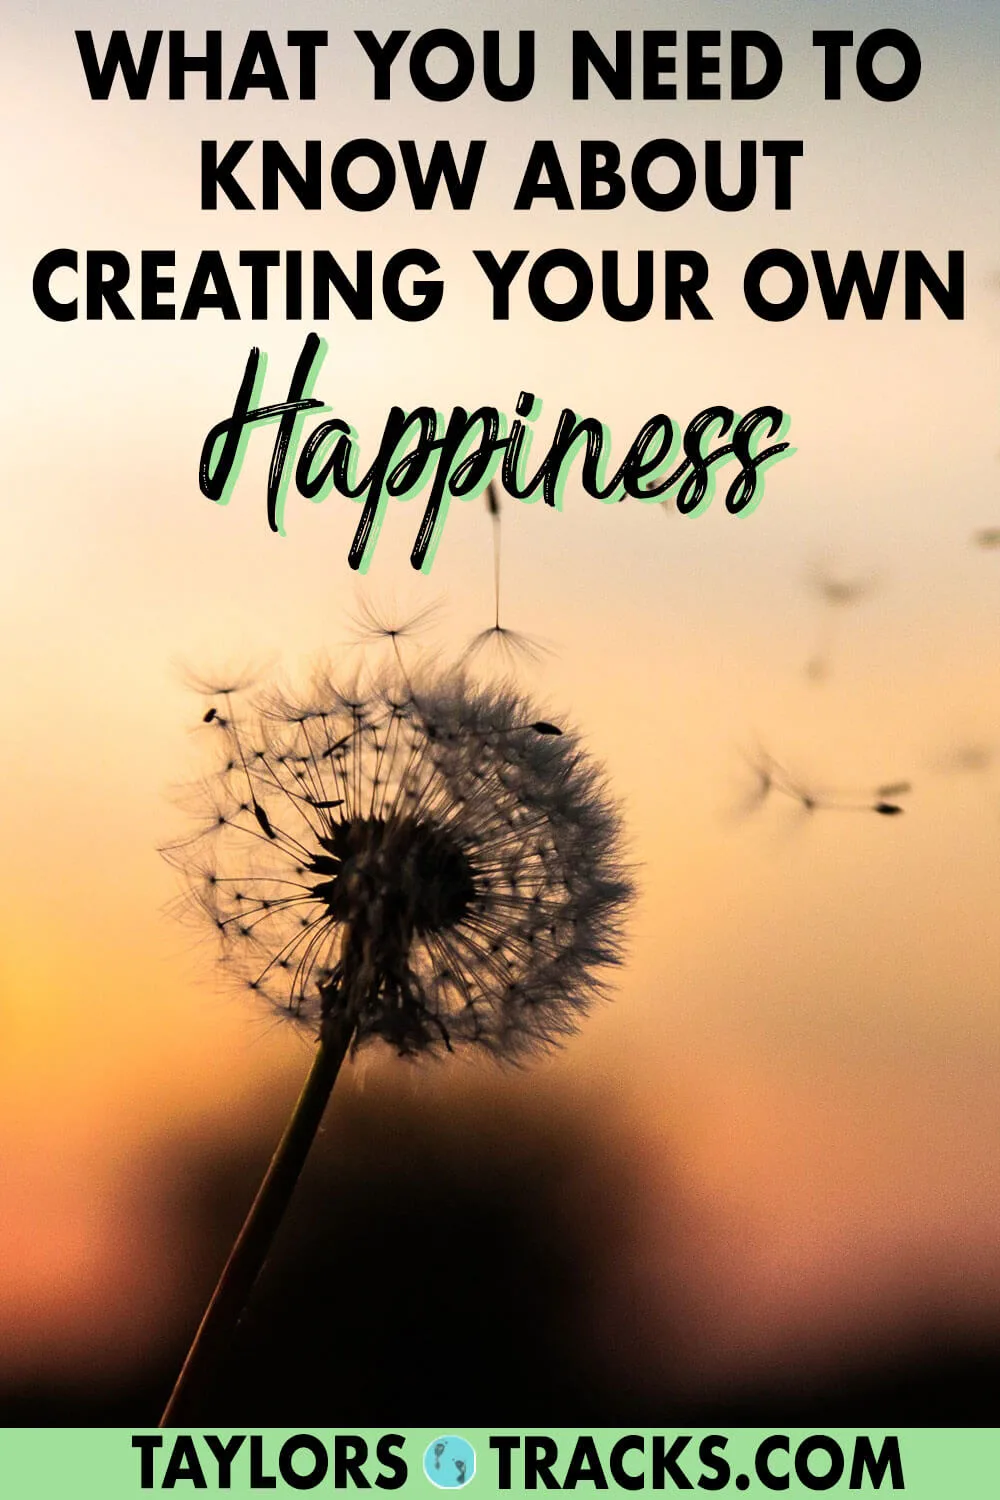 It’s possible to create your own happiness. In fact, it’s the only way to become happy. Happiness is an inside job and it’s simple when you know exactly what to focus on. Learn how to be happy with these simple happiness tips. Click to find out now!